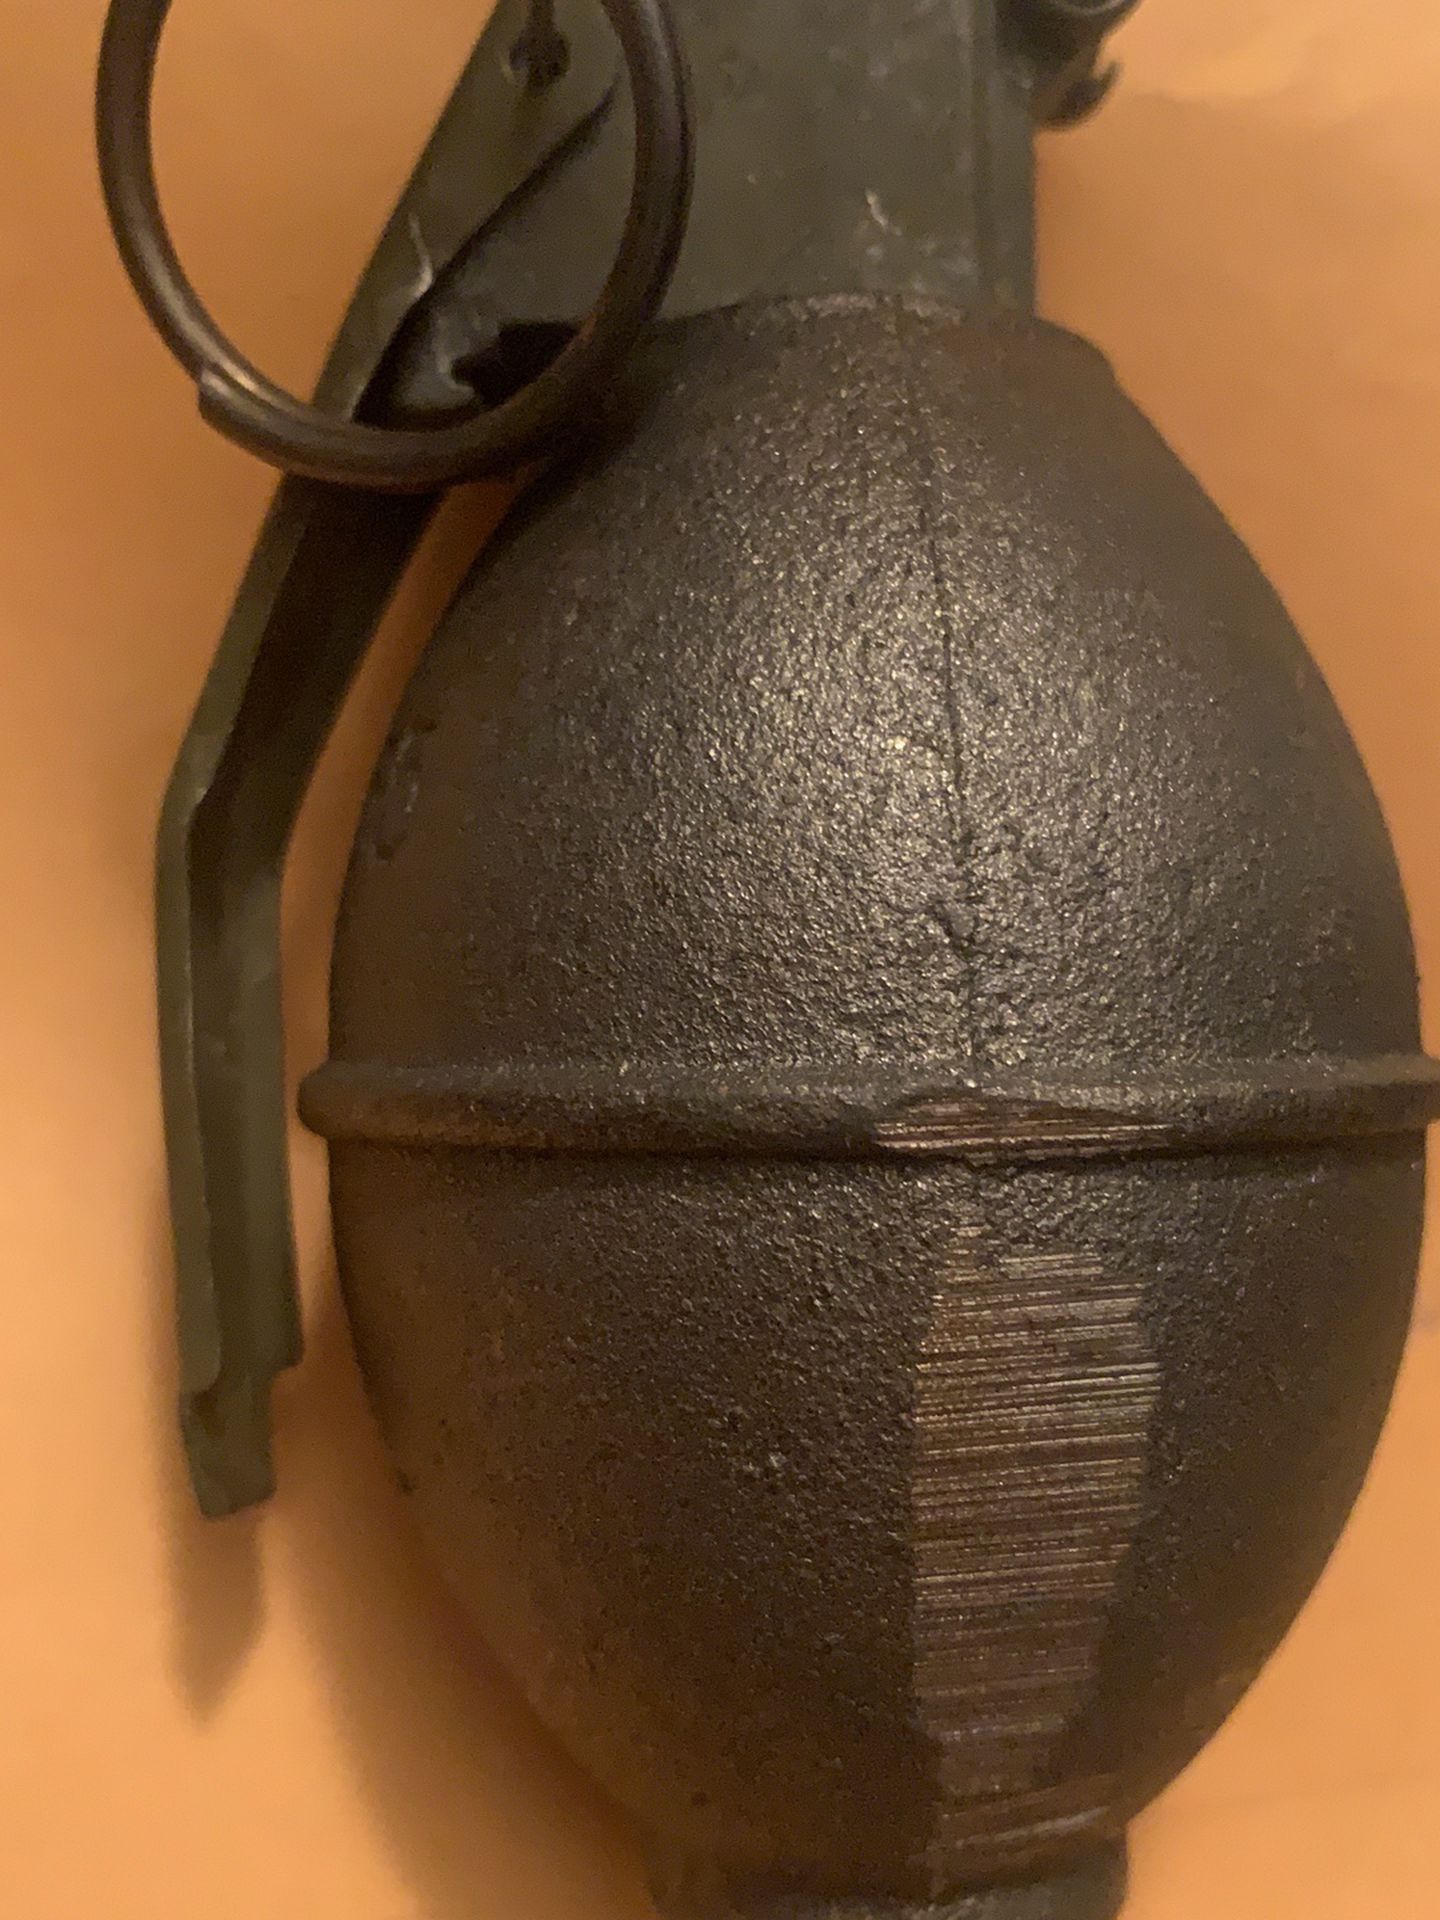 fake Life Size Military Frag Grenade Prop Made of Lead Heavy Real Pin Pull Pranks Paper weight Gags Funny Military  Weapons Call of Duty